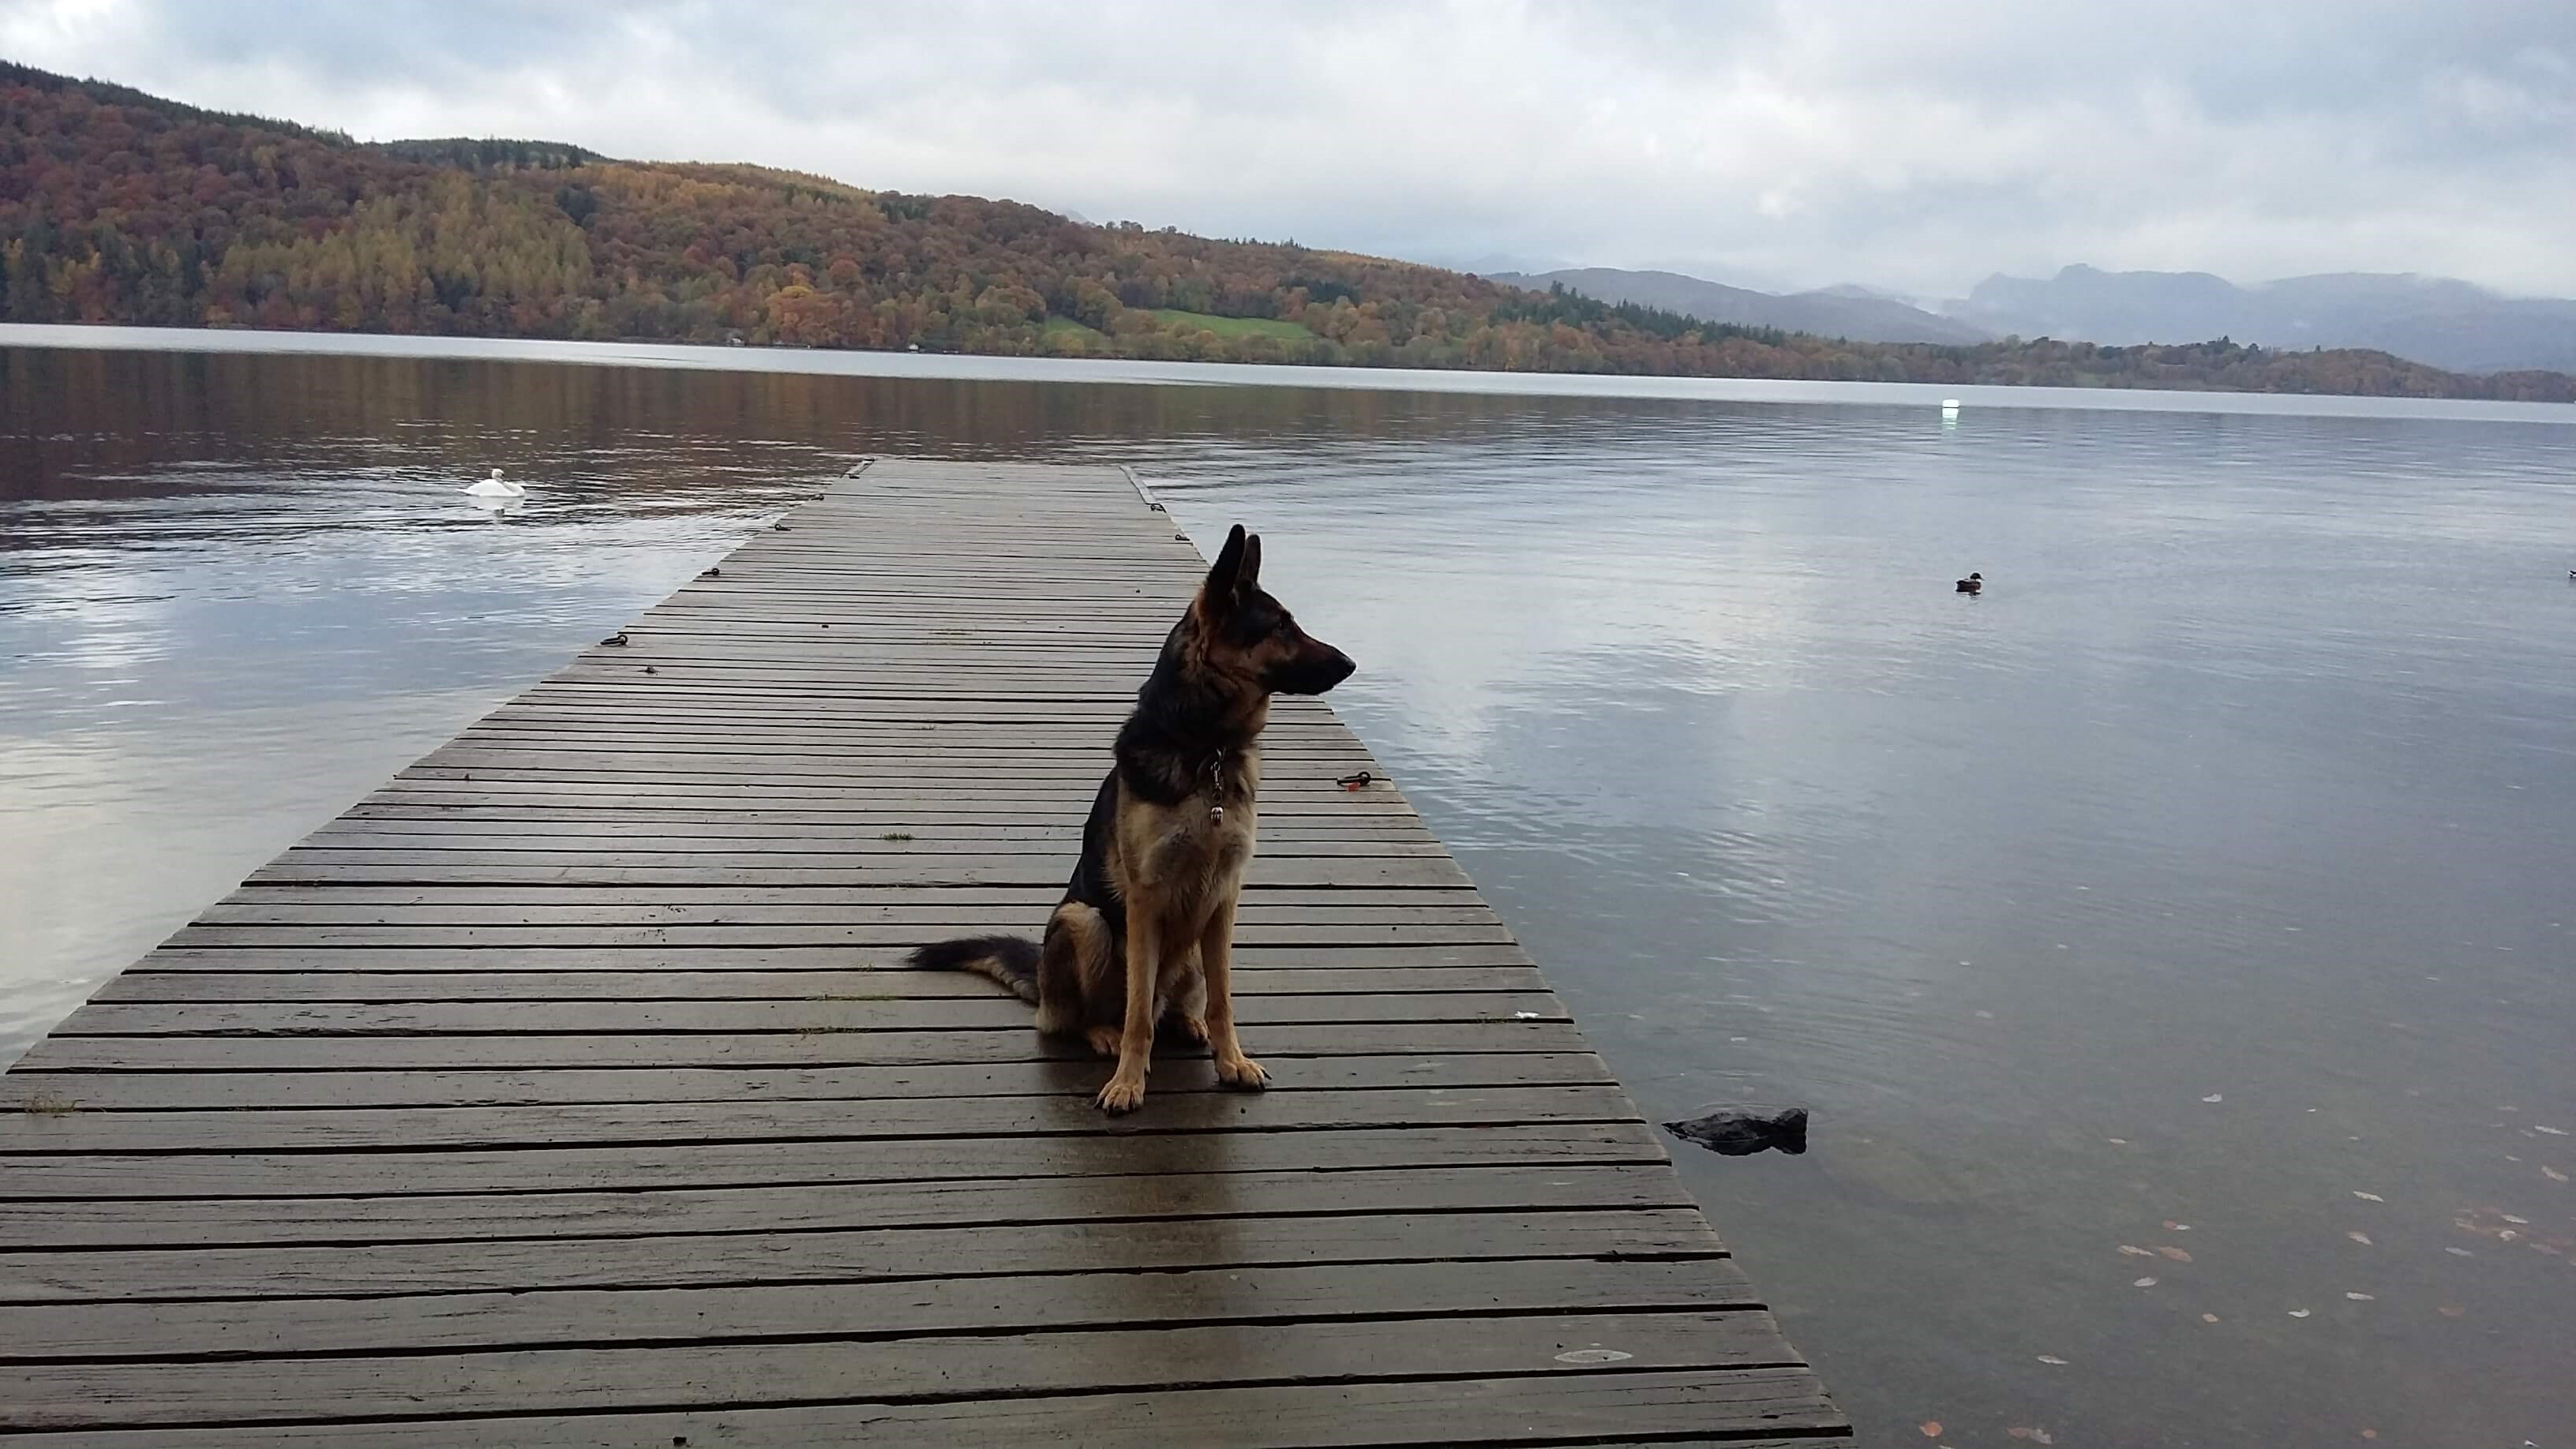 Troy, a German shepherd guide dog, sits on a boardwalk at Windermere looking out over the water